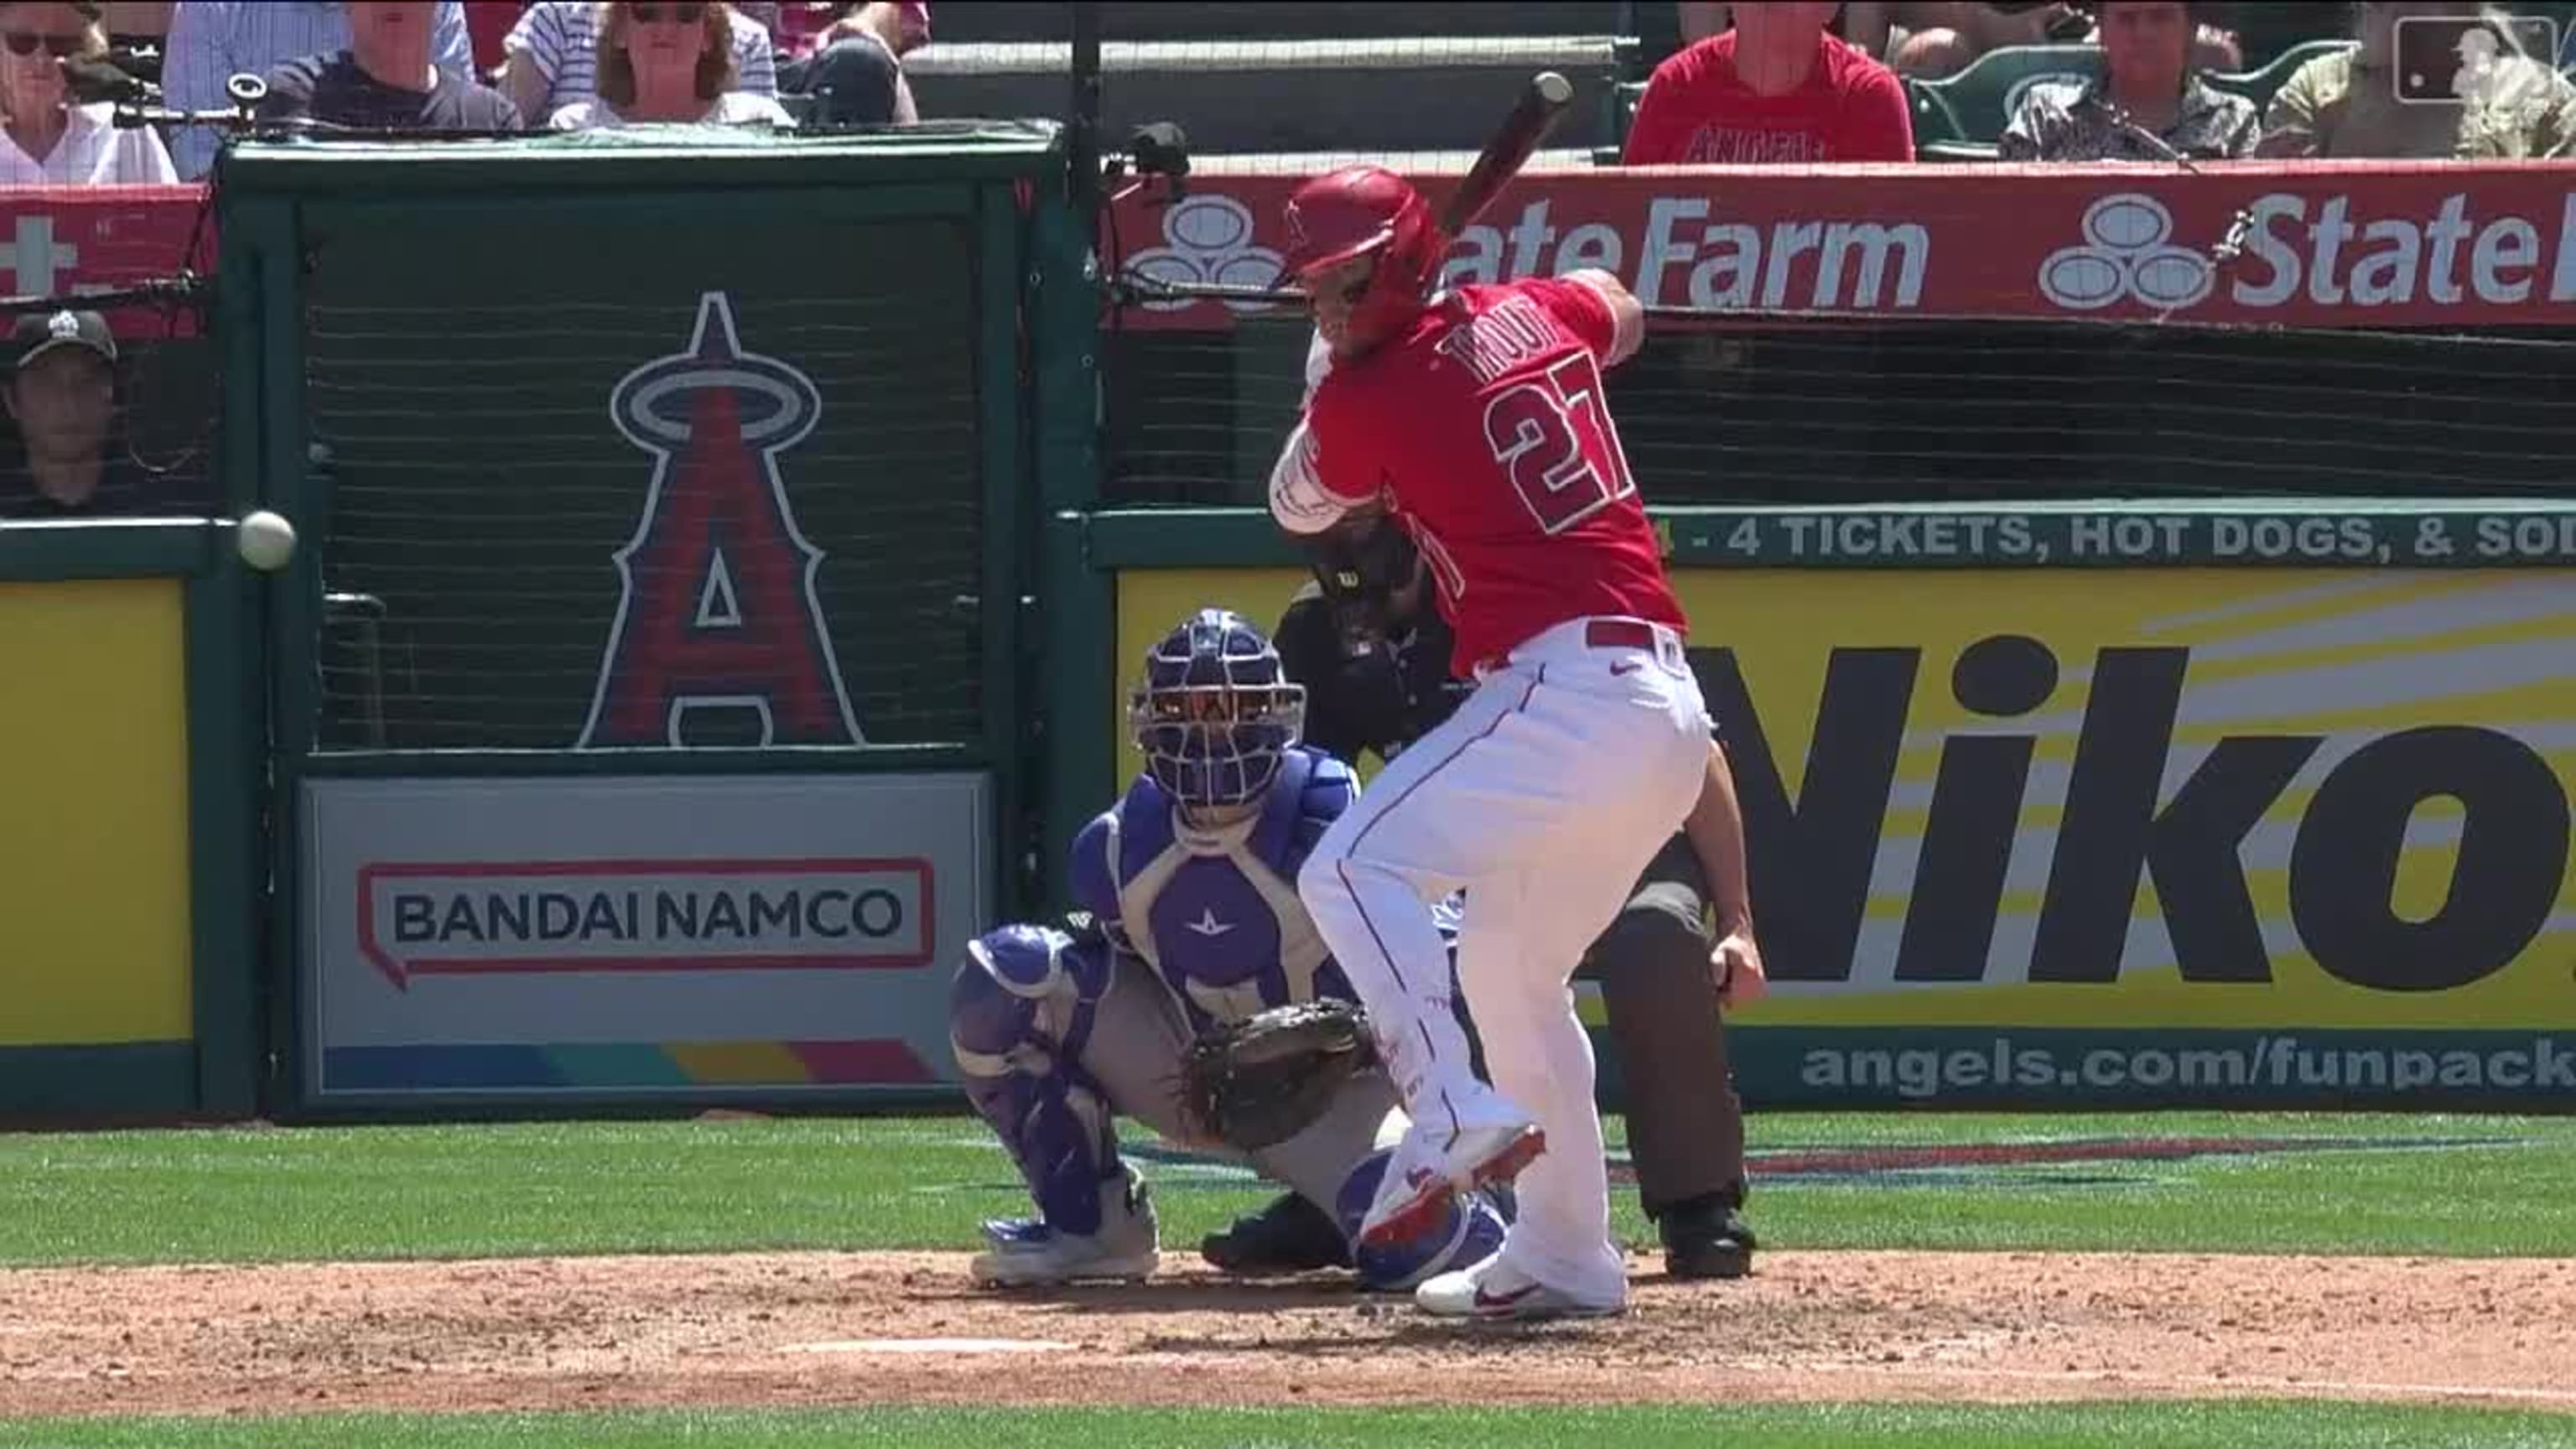 Rangers hit 3 HRs to knock off Angels